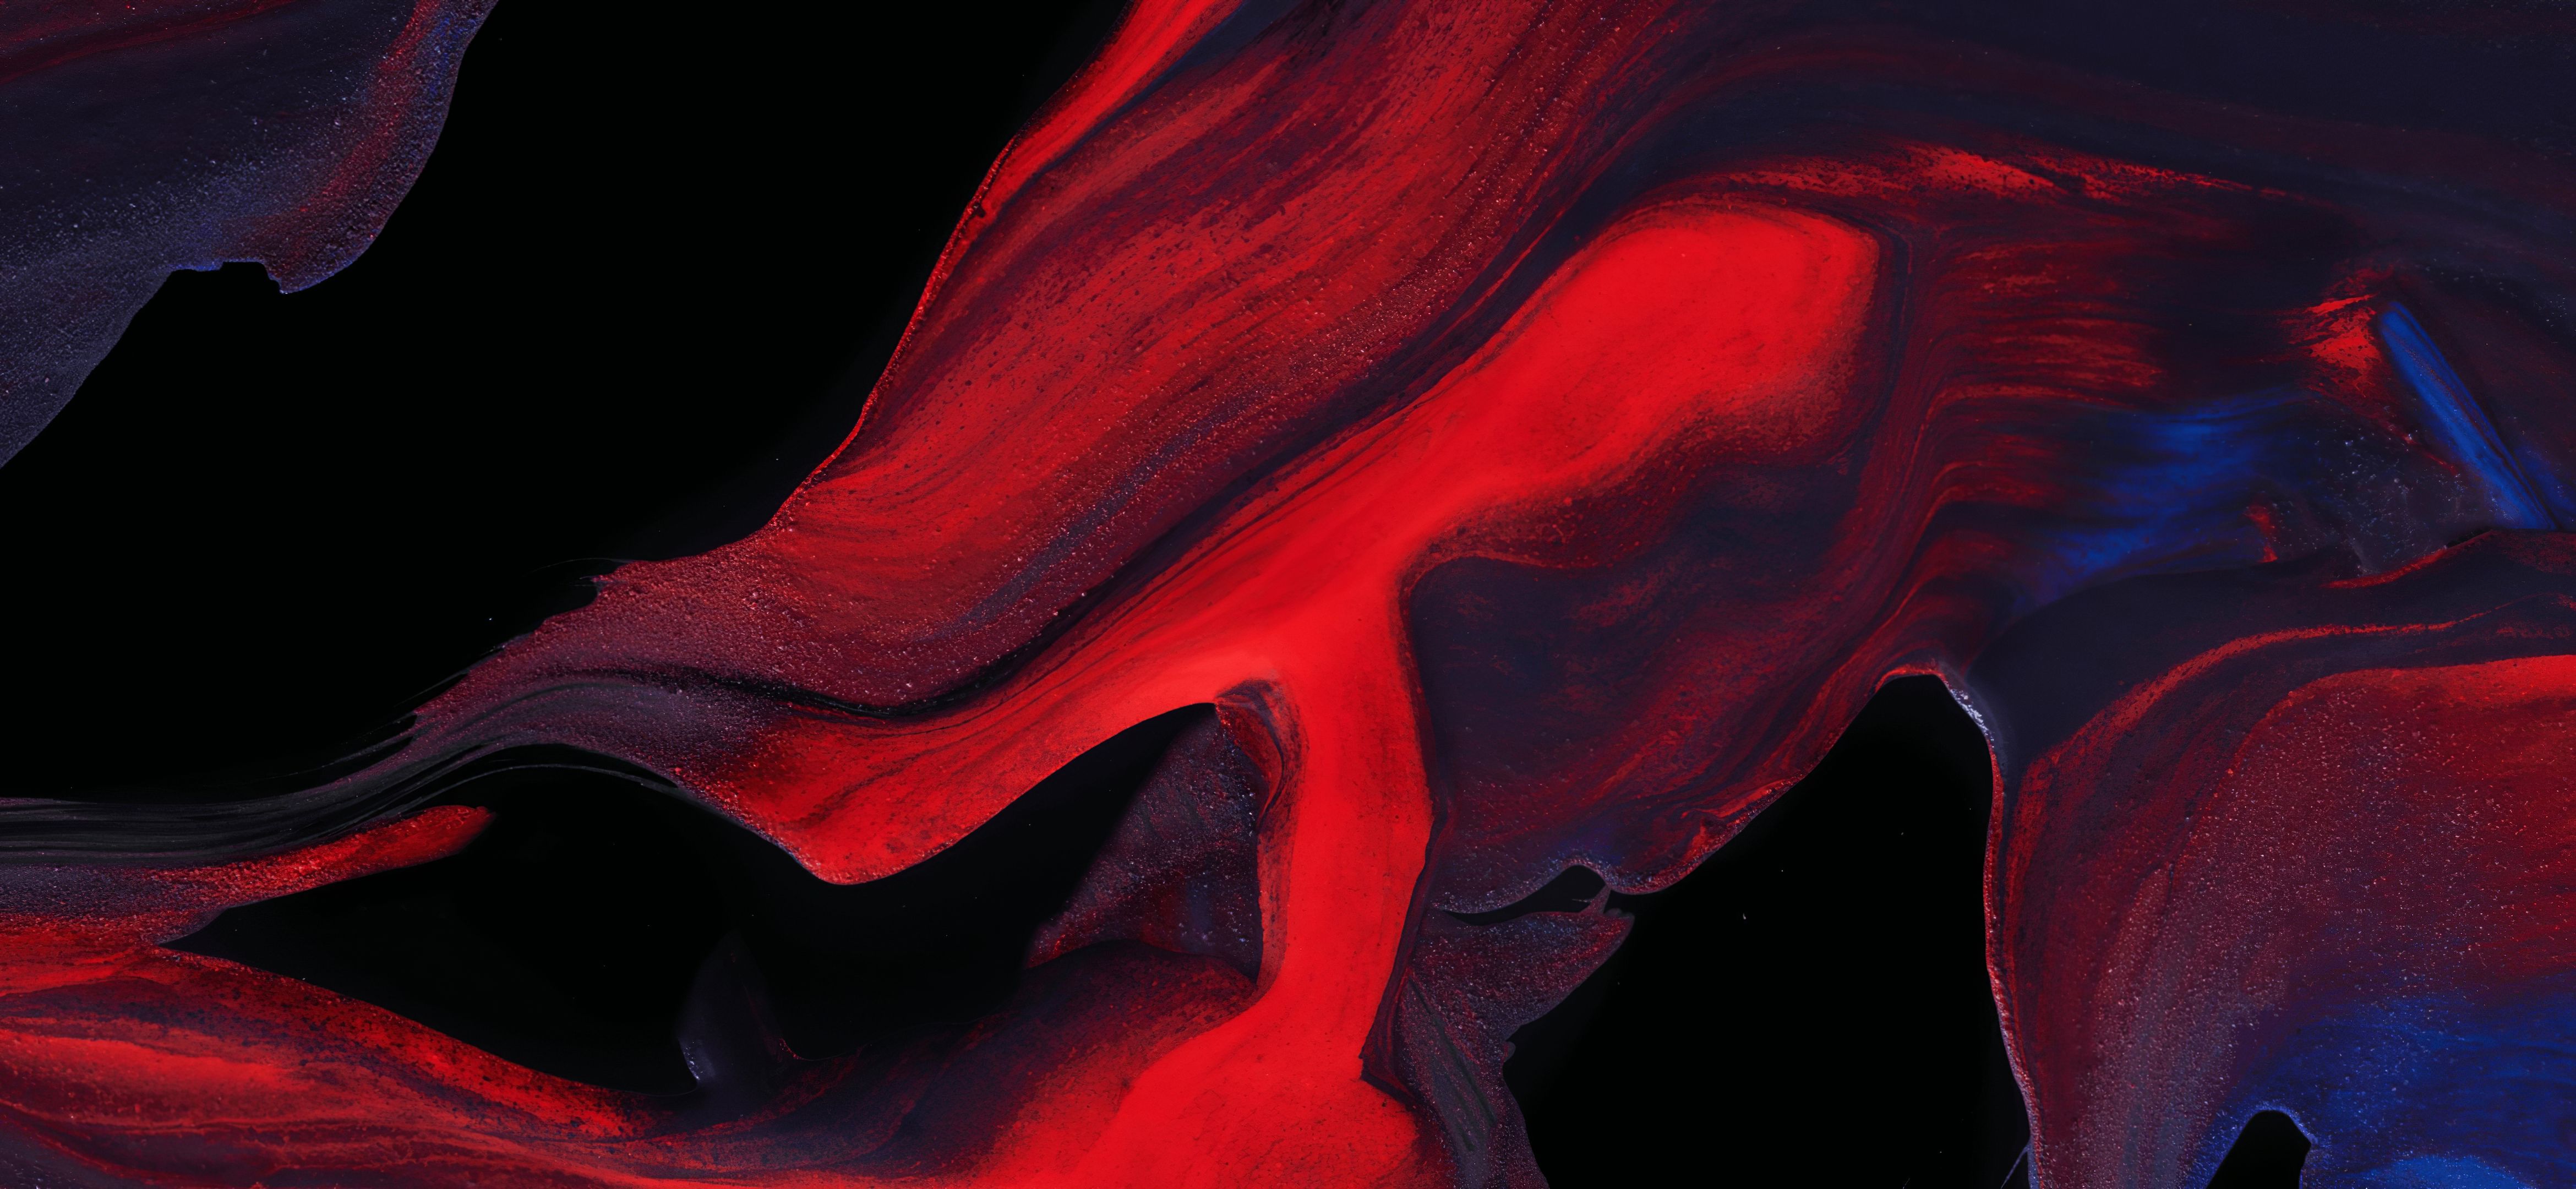 Lava 4K Wallpaper, Red, ColorOS, Stock, Abstract